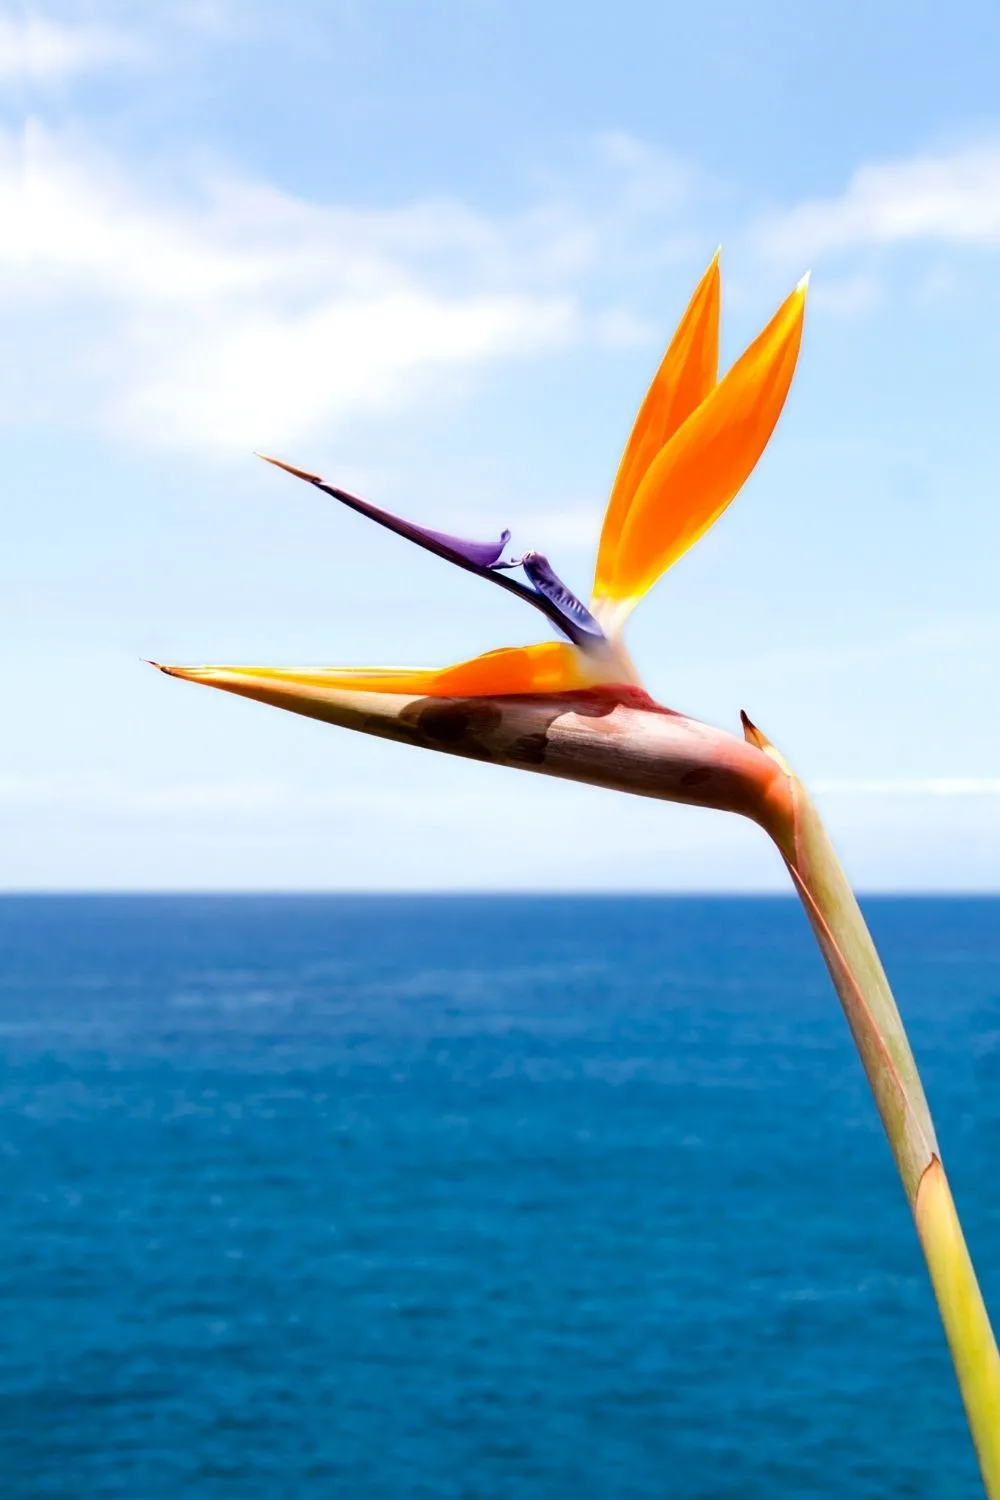 For the Bird of Paradise (Strelitzia) to grow flowers, it's best to place it in areas receiving high or bright light